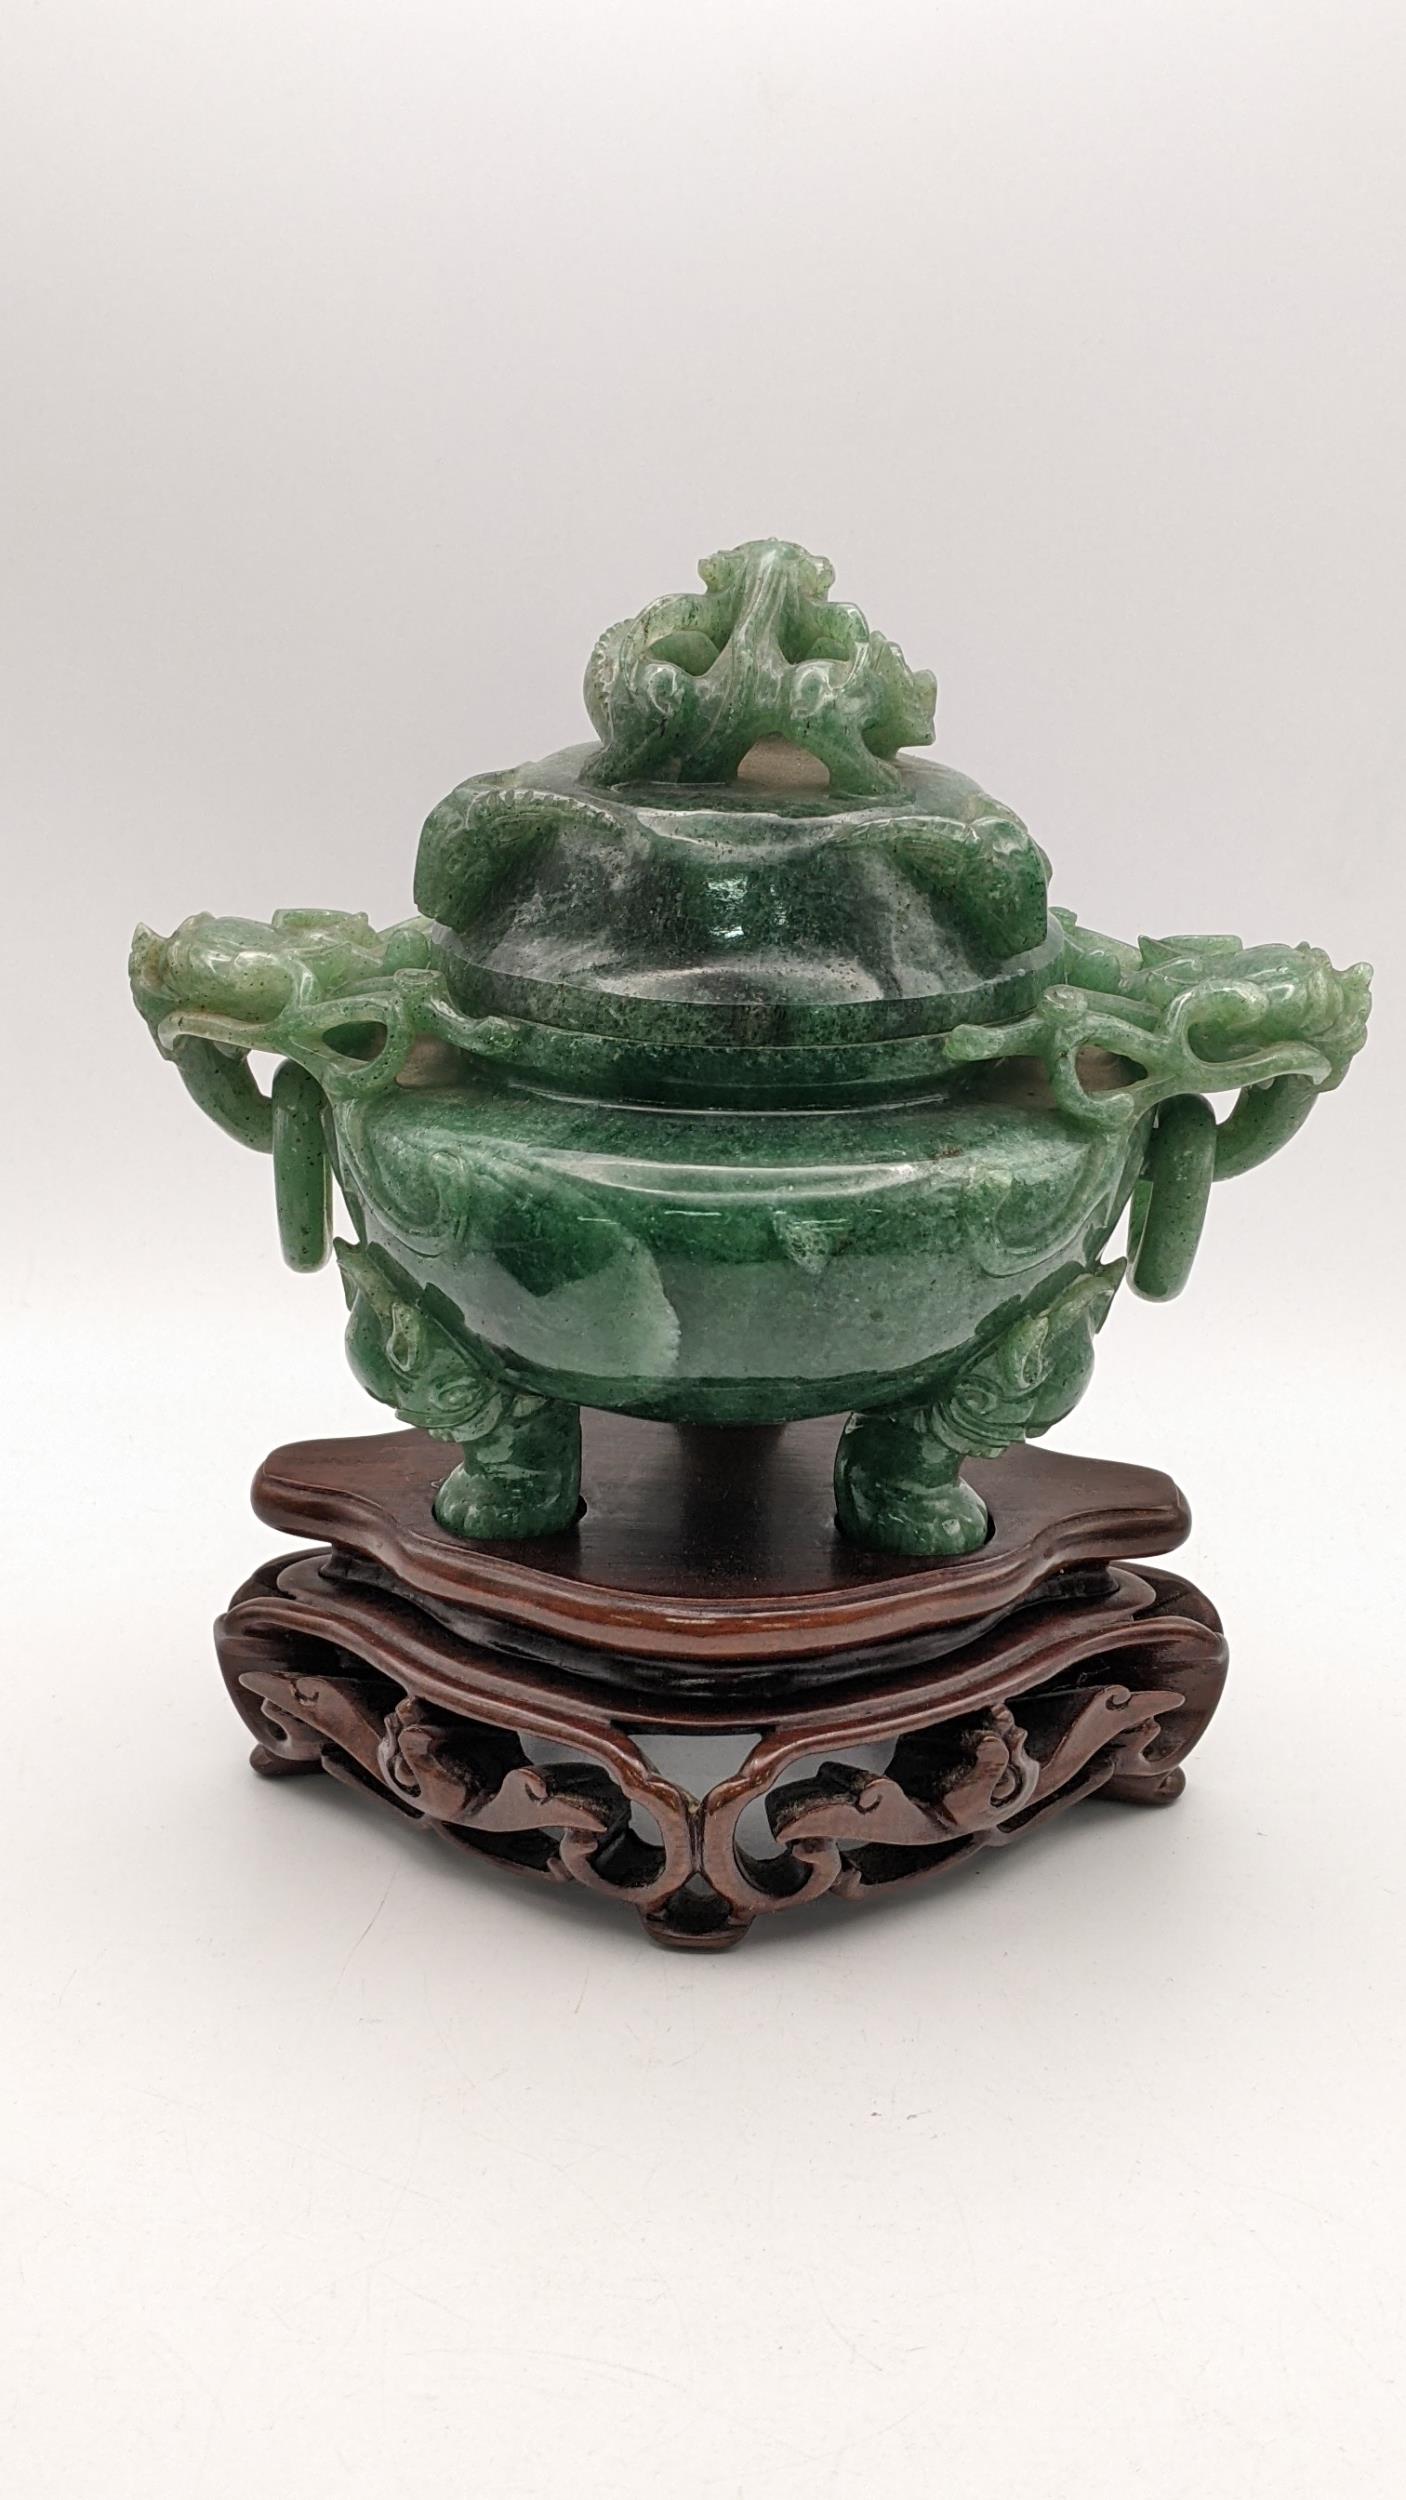 A 20th century Chinese jade censor, the lid decorated with a coiled dragon - Image 3 of 5